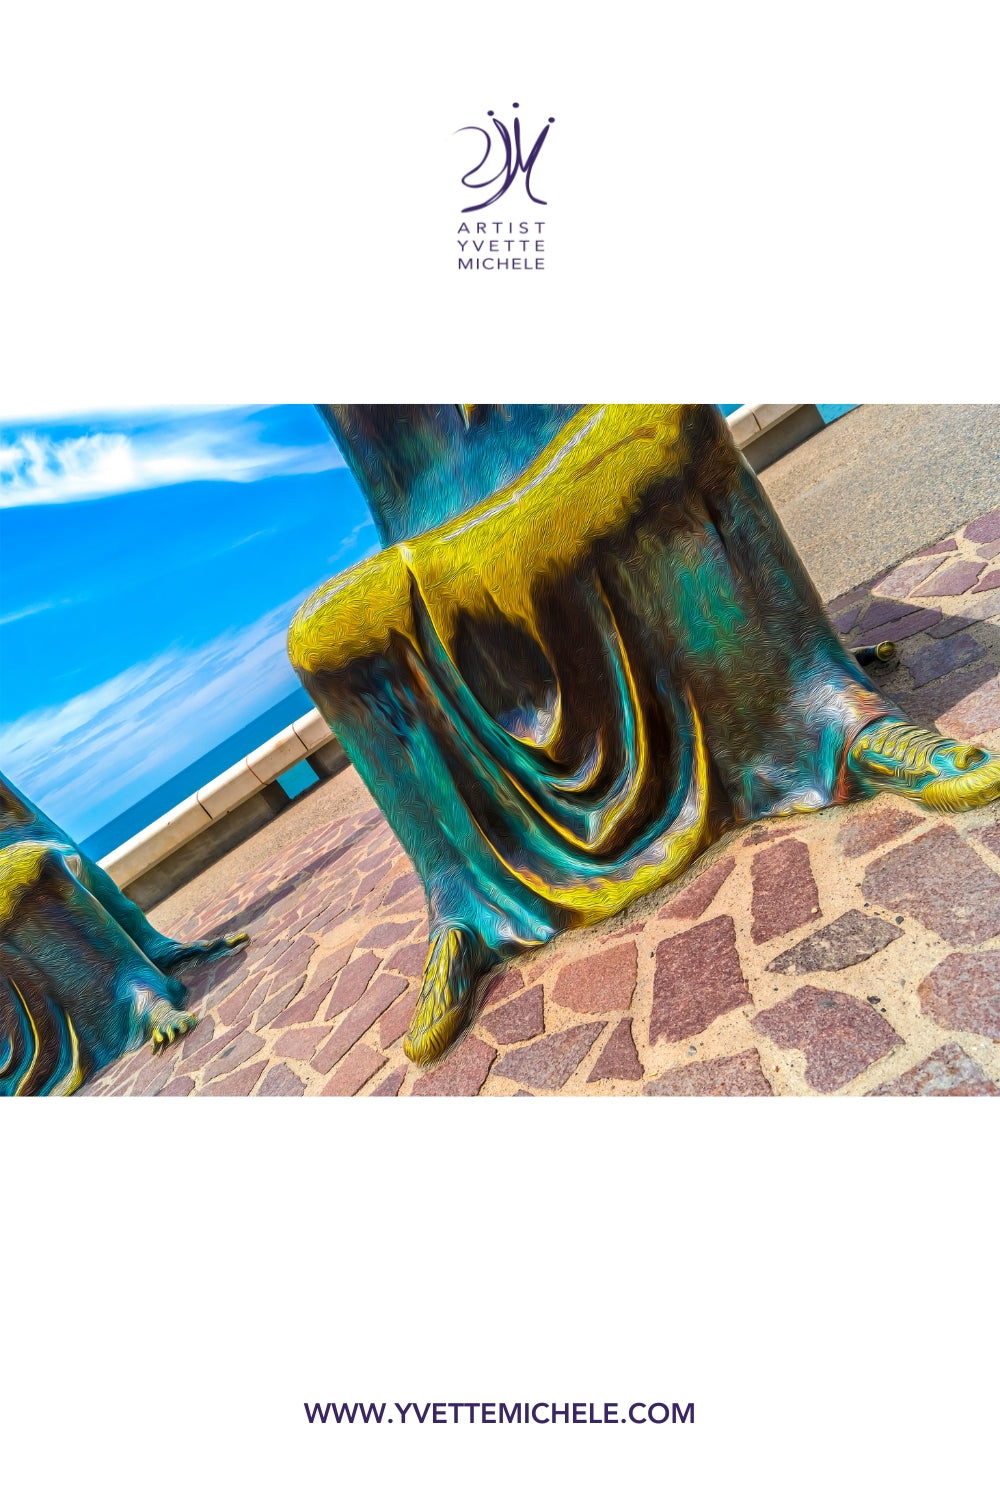 Walk On The Malecon - New Chucks - Single Edition Large Photography Print - House of Yvette Michele 